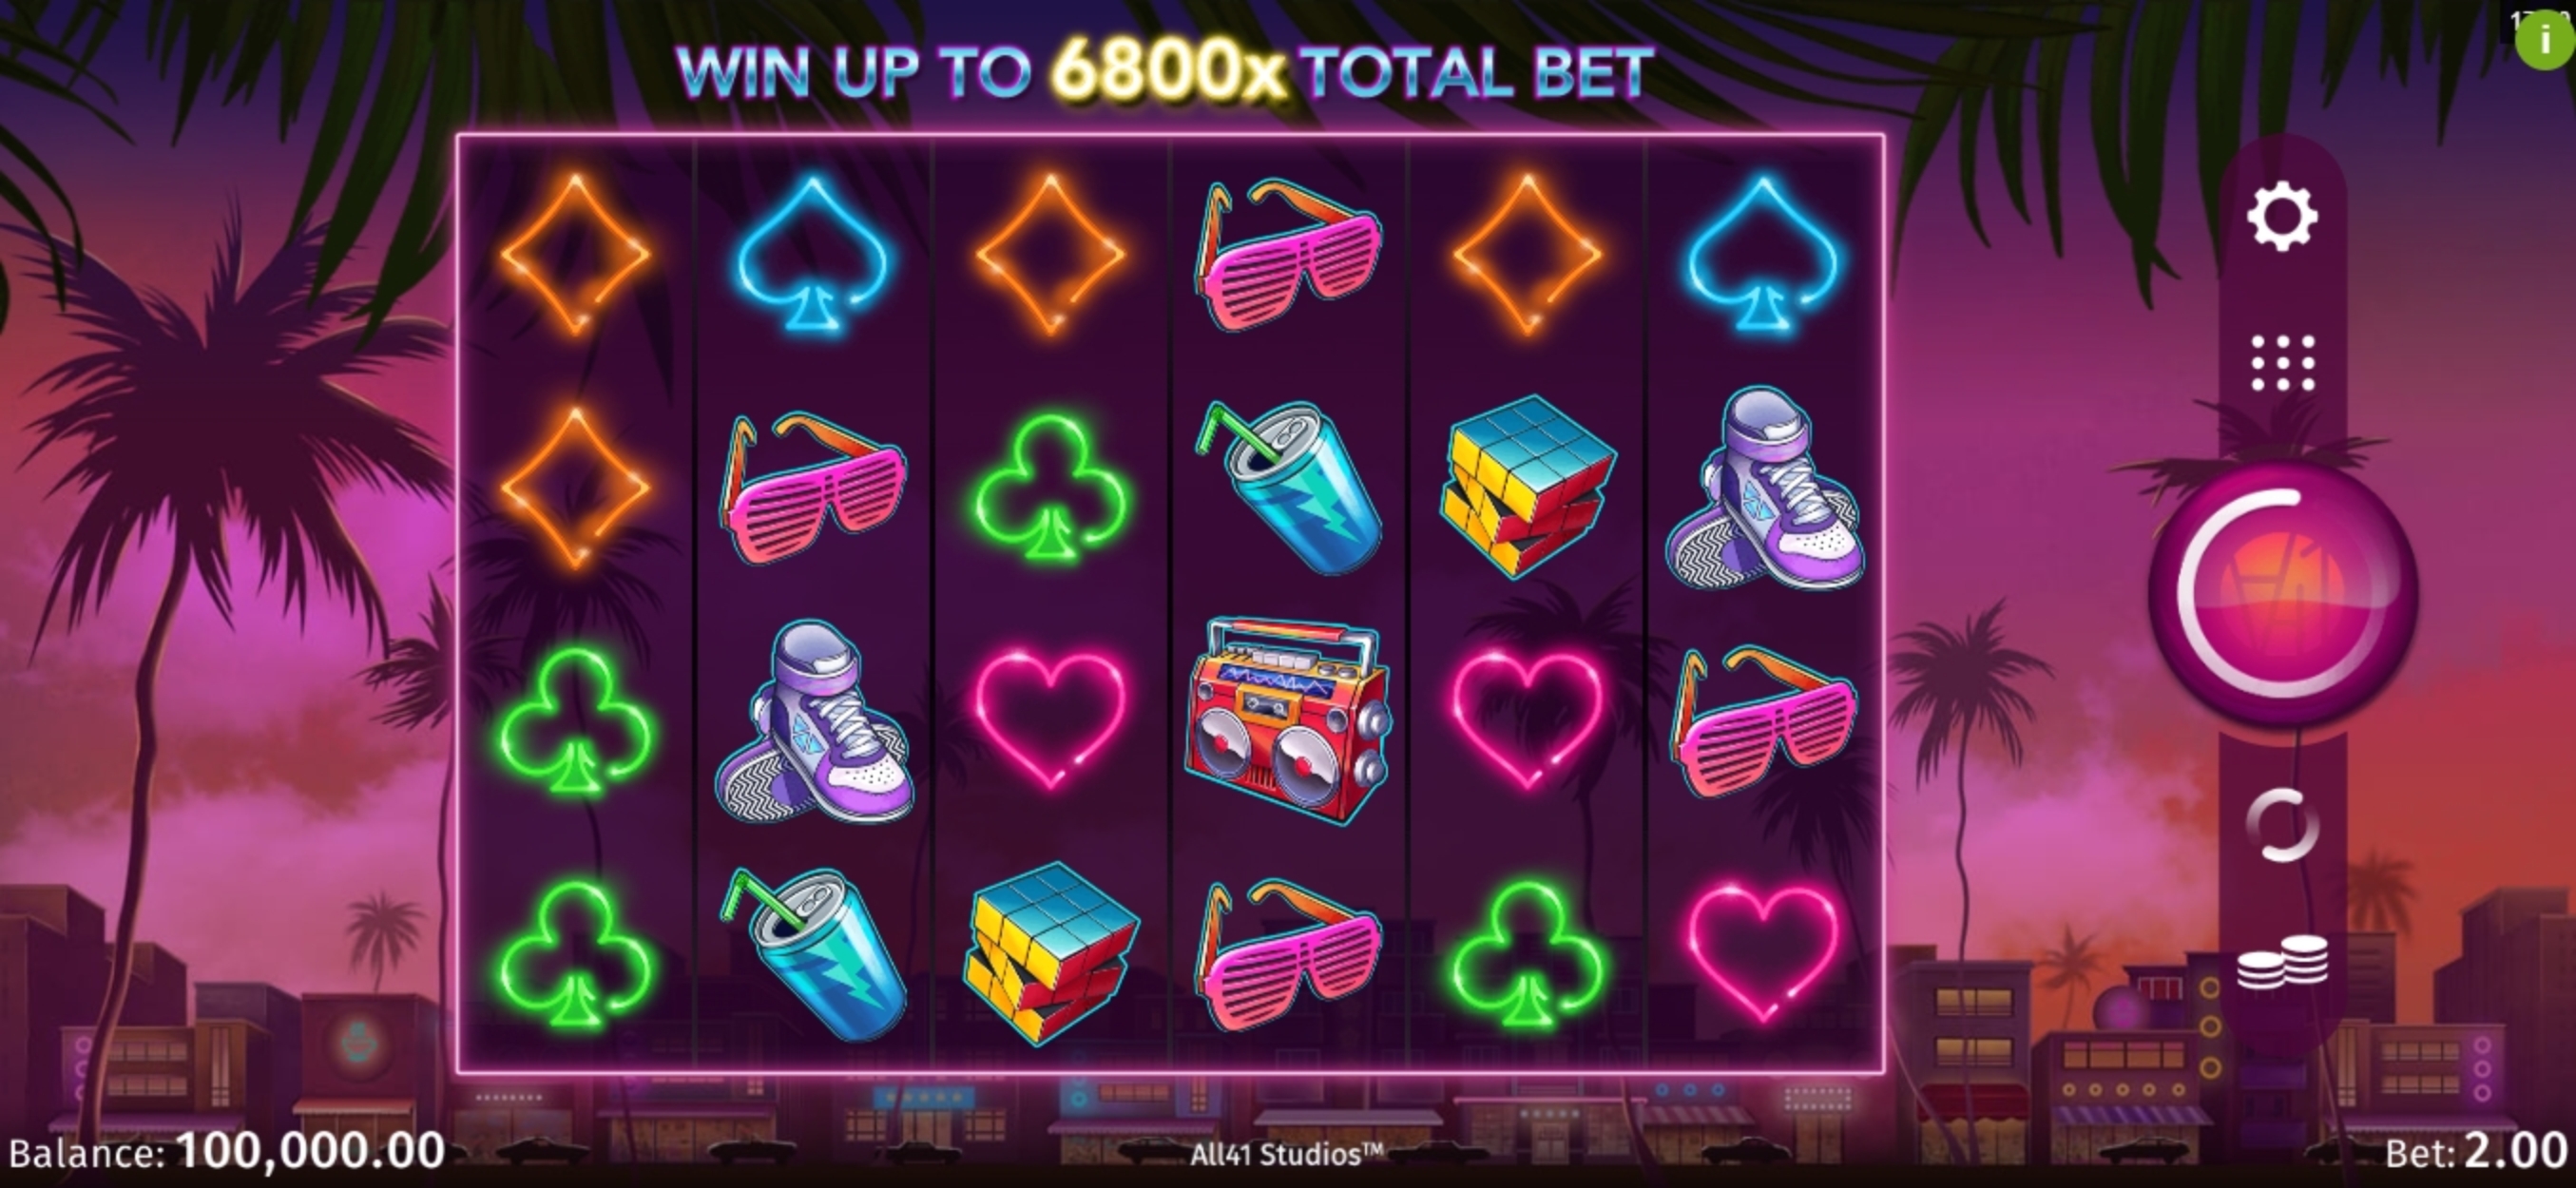 Reels in Electric Avenue Slot Game by All41 Studios